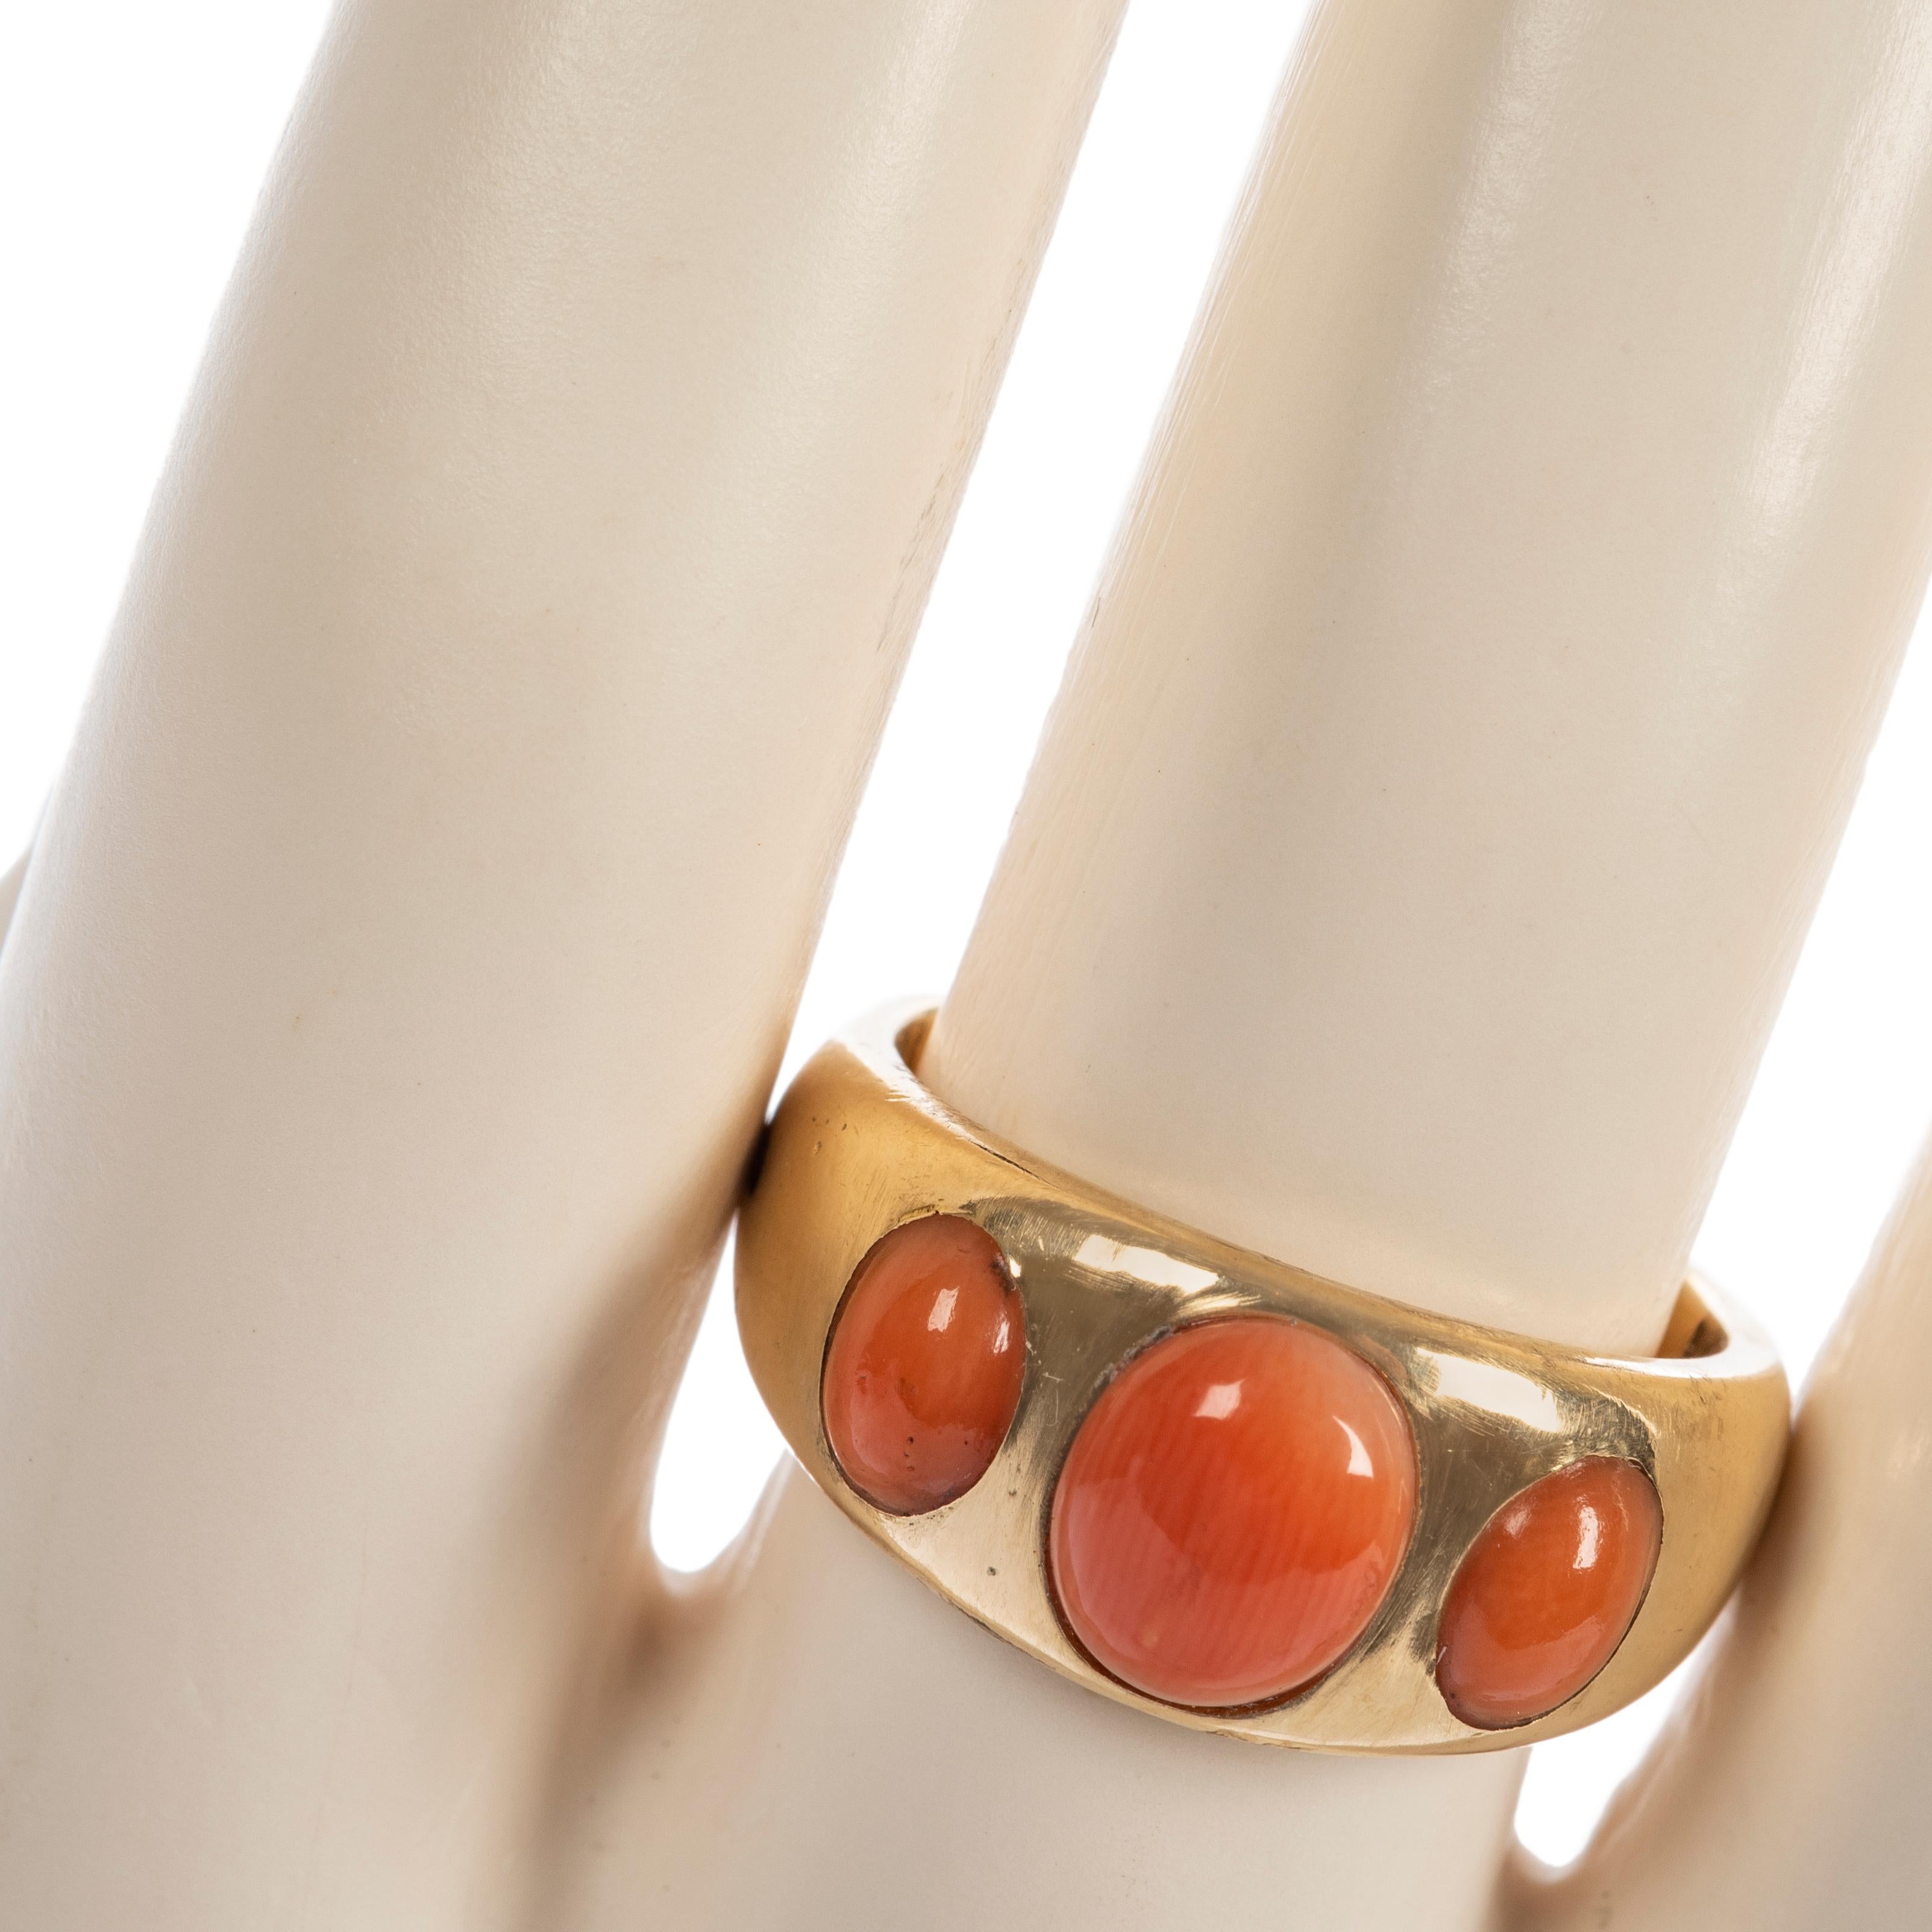 In polished 18k yellow gold of good weight, gypsy set with three coral cabochons.

Size-6 ¾; band measures 3/8 in. (1 cm) at its widest.

Fully hallmarked inside of shank with additional date letter mark on exterior, London, England, stamped JW
